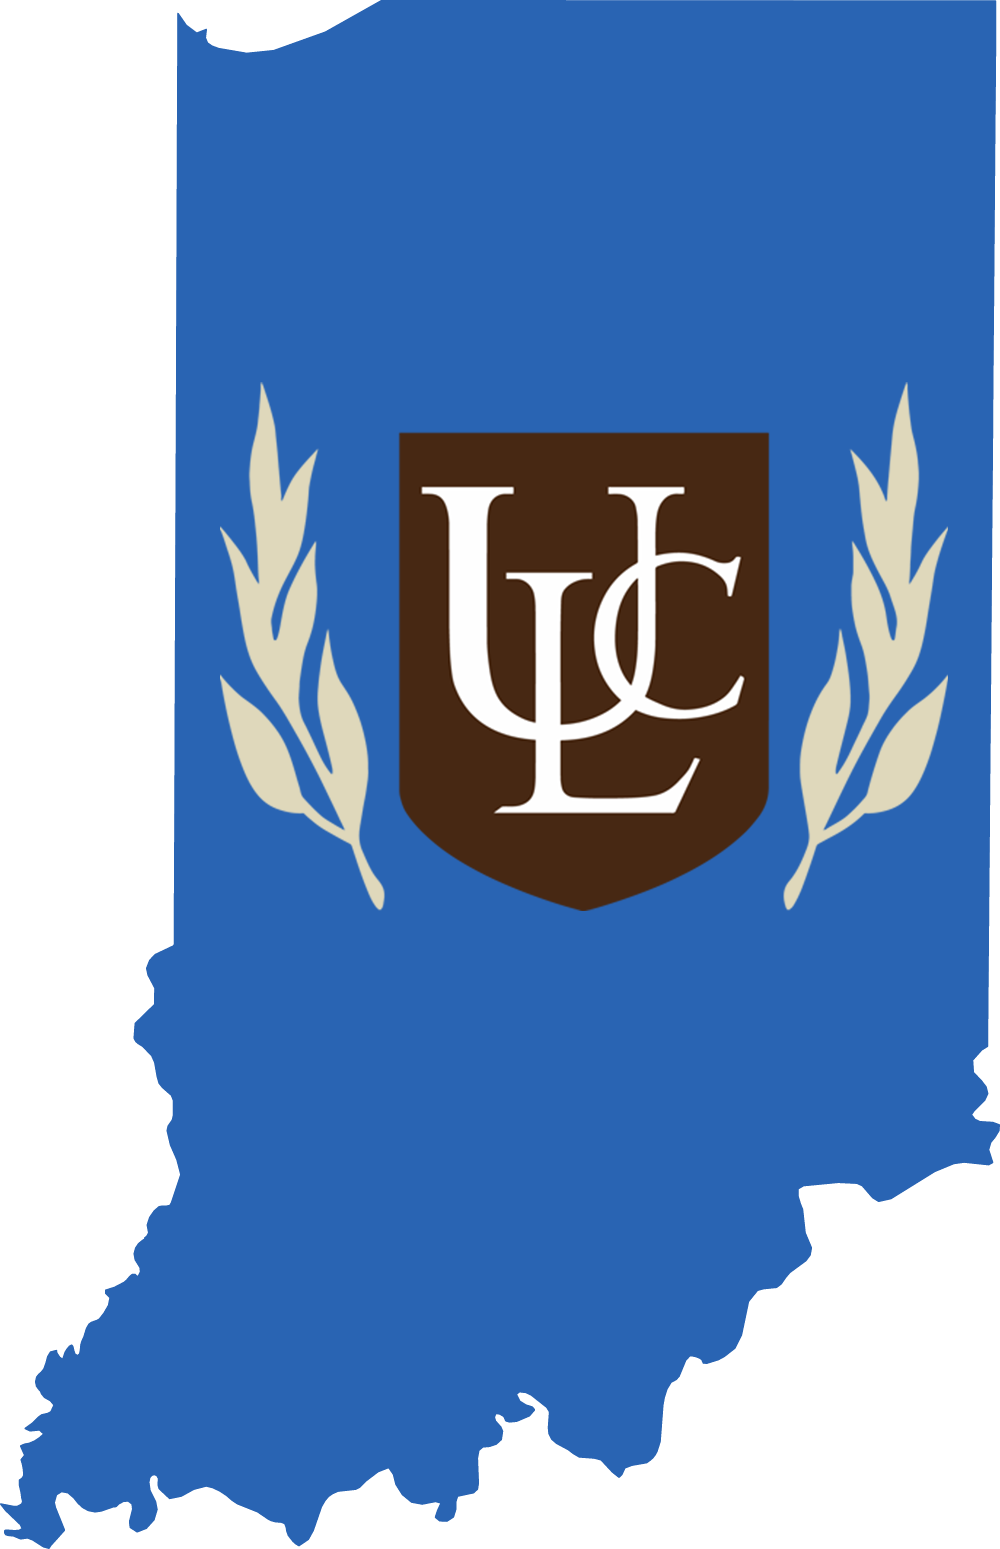 An outline of Indiana with the ULC logo